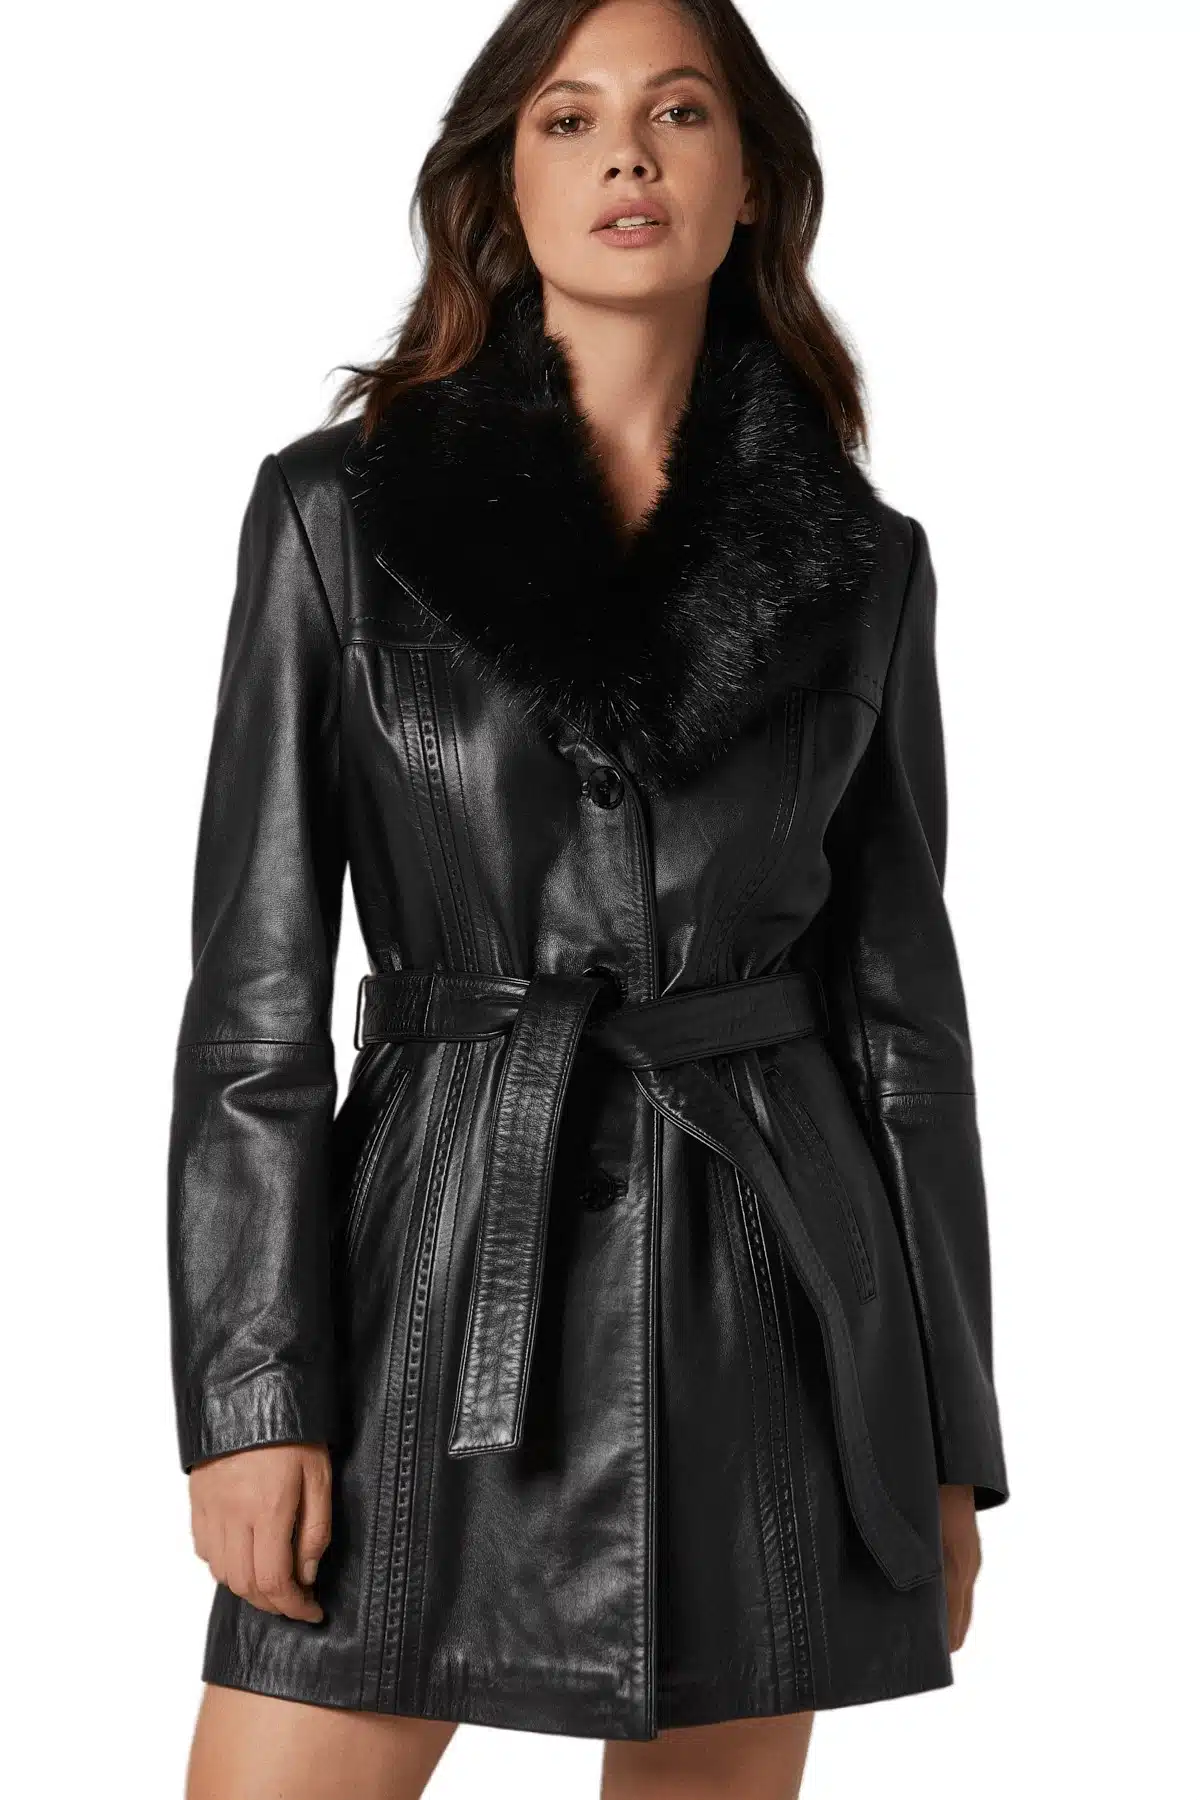 Evie Women's 100 % Real Black Leather Fur Lined Coat